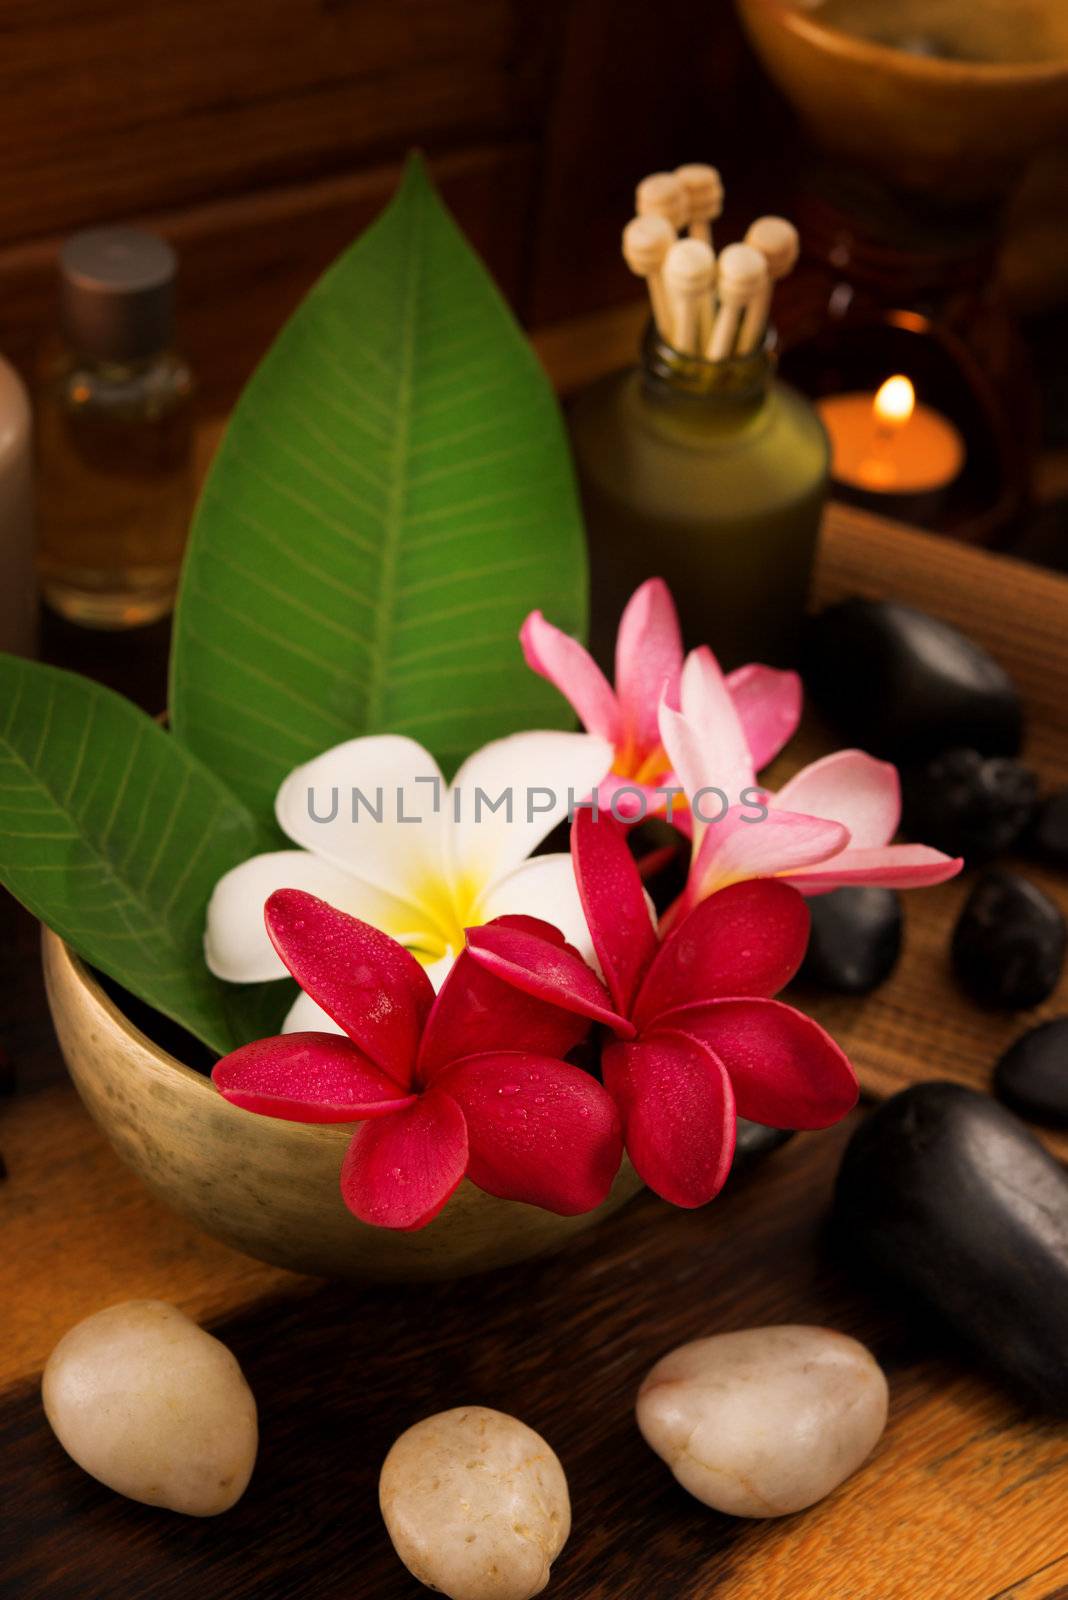 Spa still life setting with aromatic candles, frangipani flower, cold and hot stones.